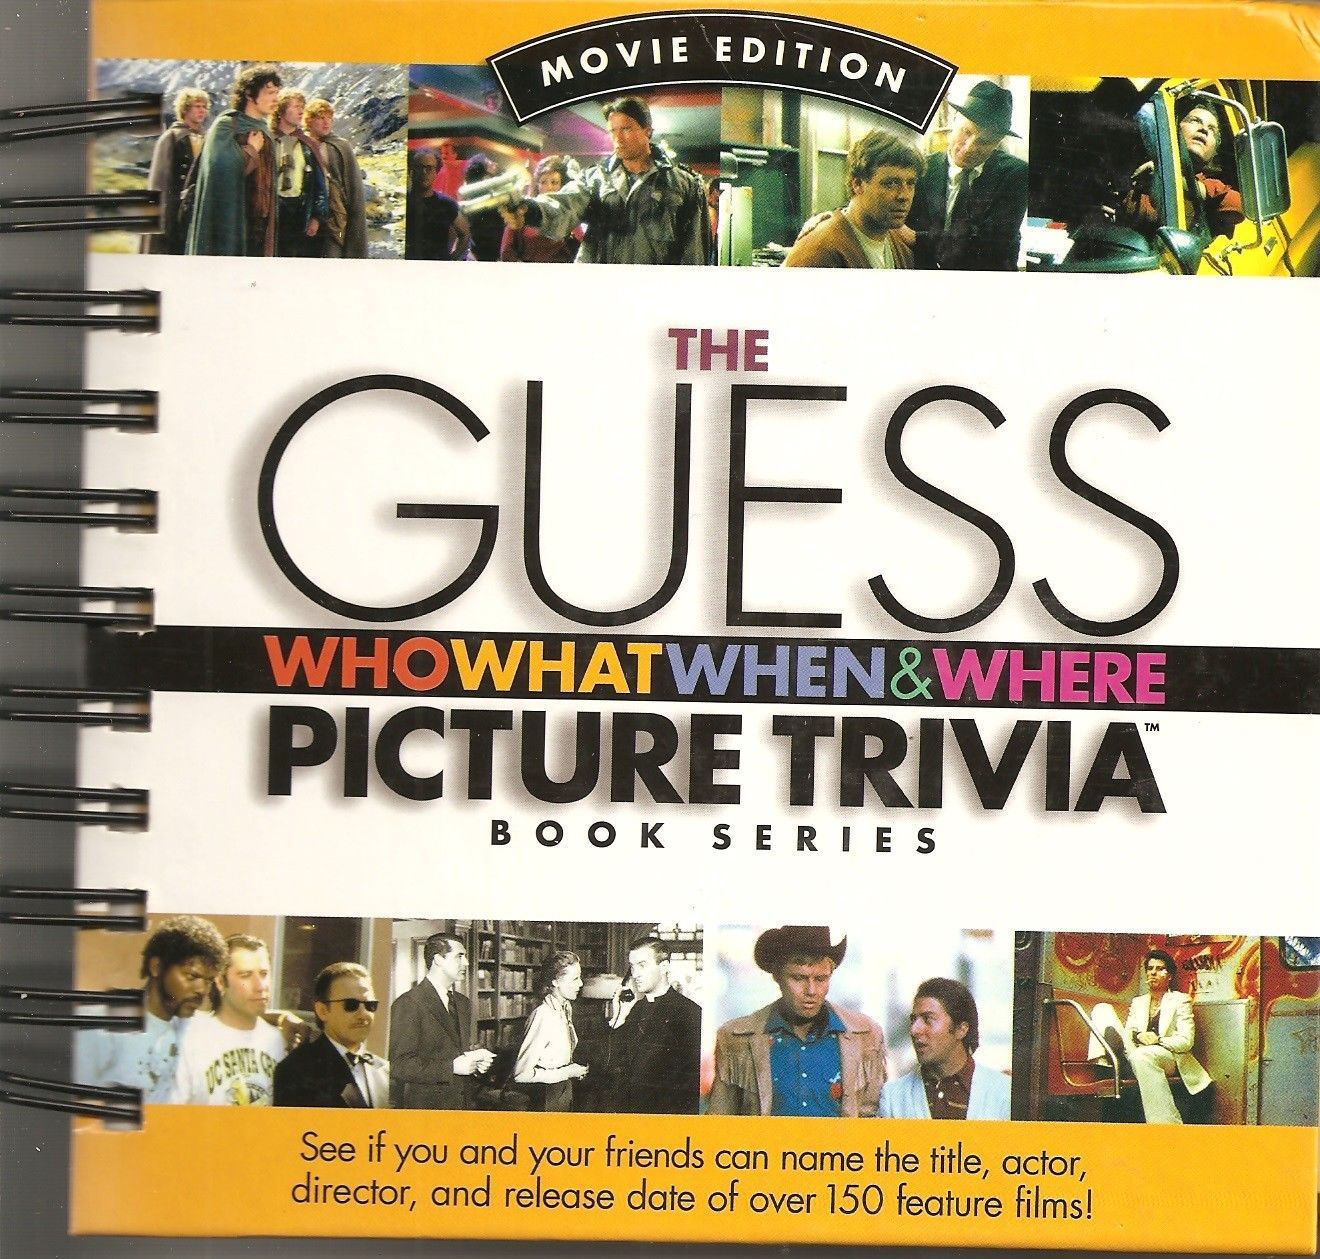 Guess Who What When & Where Picture Trivia Book Series: Movie Edition Cutler, Da - $10.50